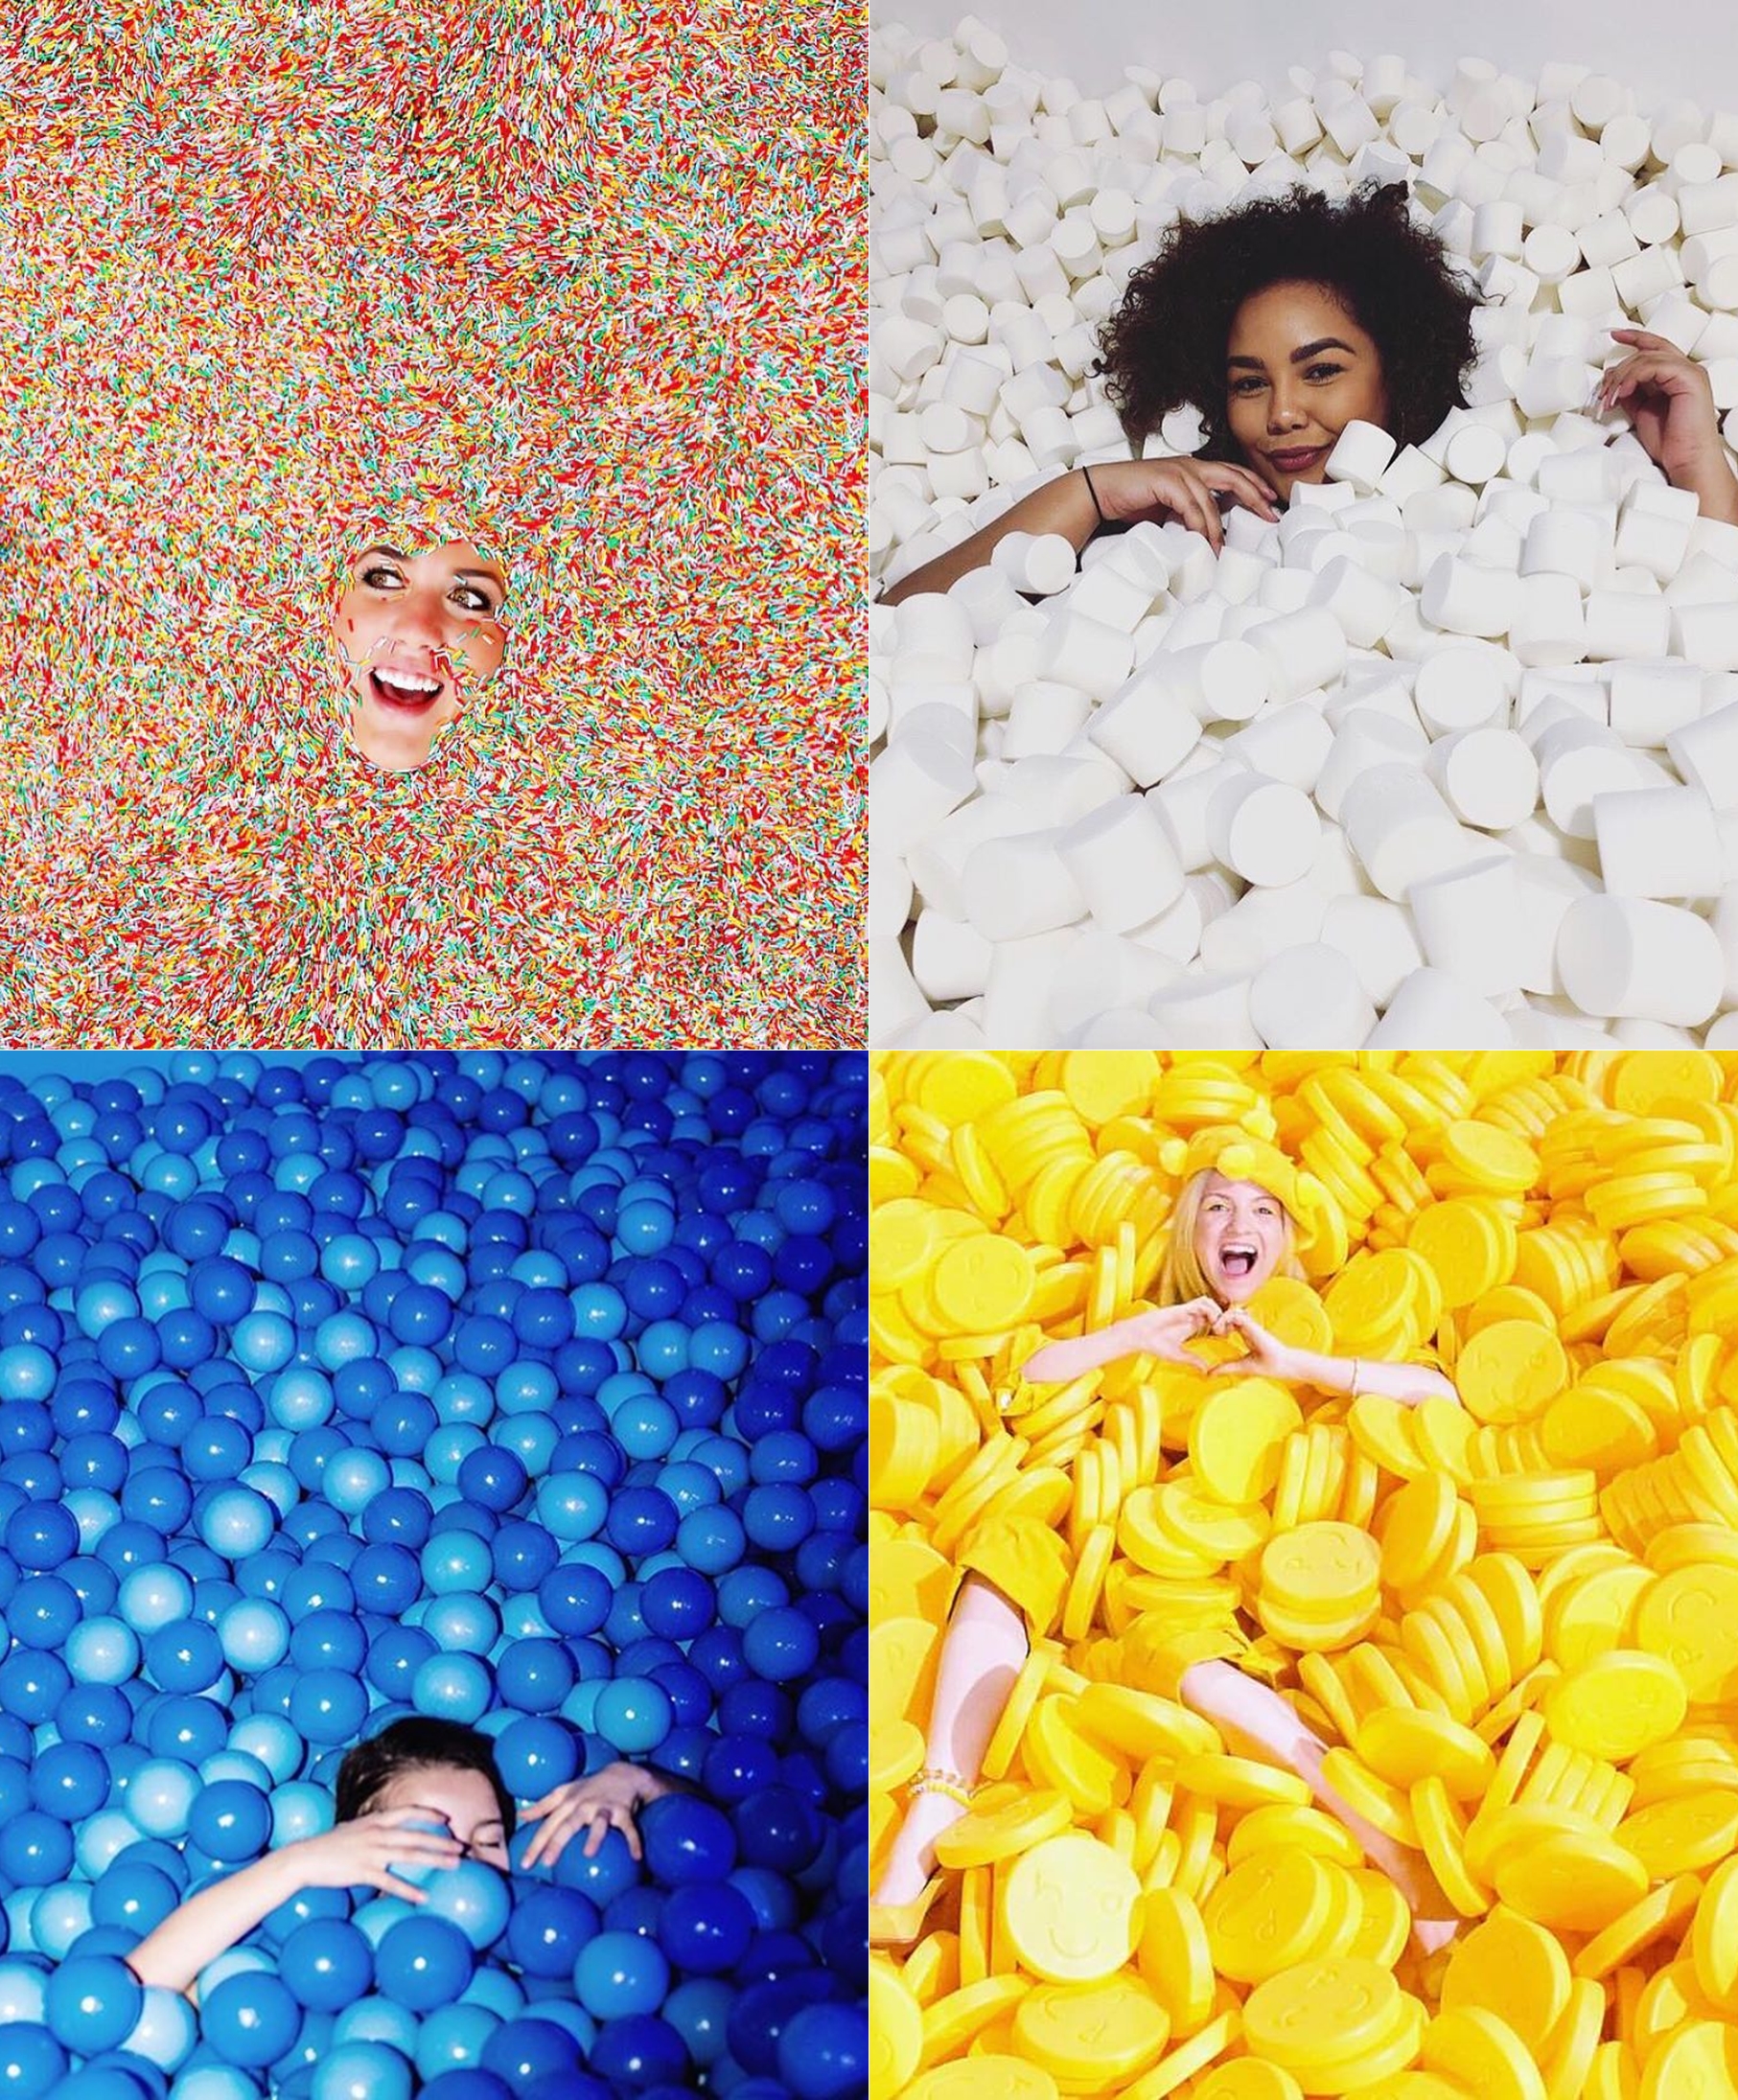 Museum of Ice Cream Launches Equally Instagram-Worthy Store in New